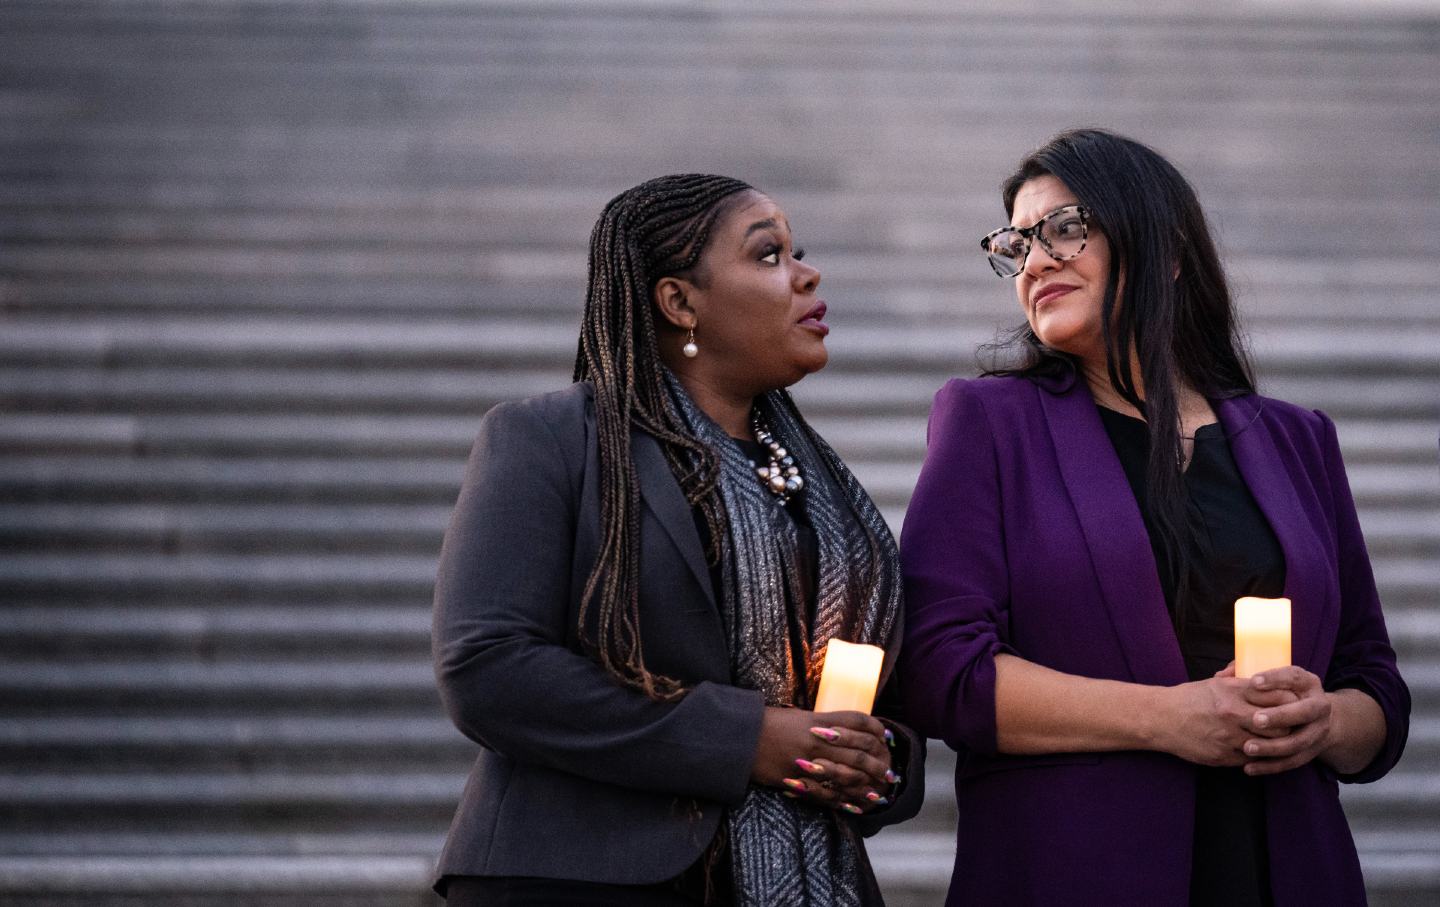 Cori Bush speaks to Rashida Tlaib while both hold candles in front of steps